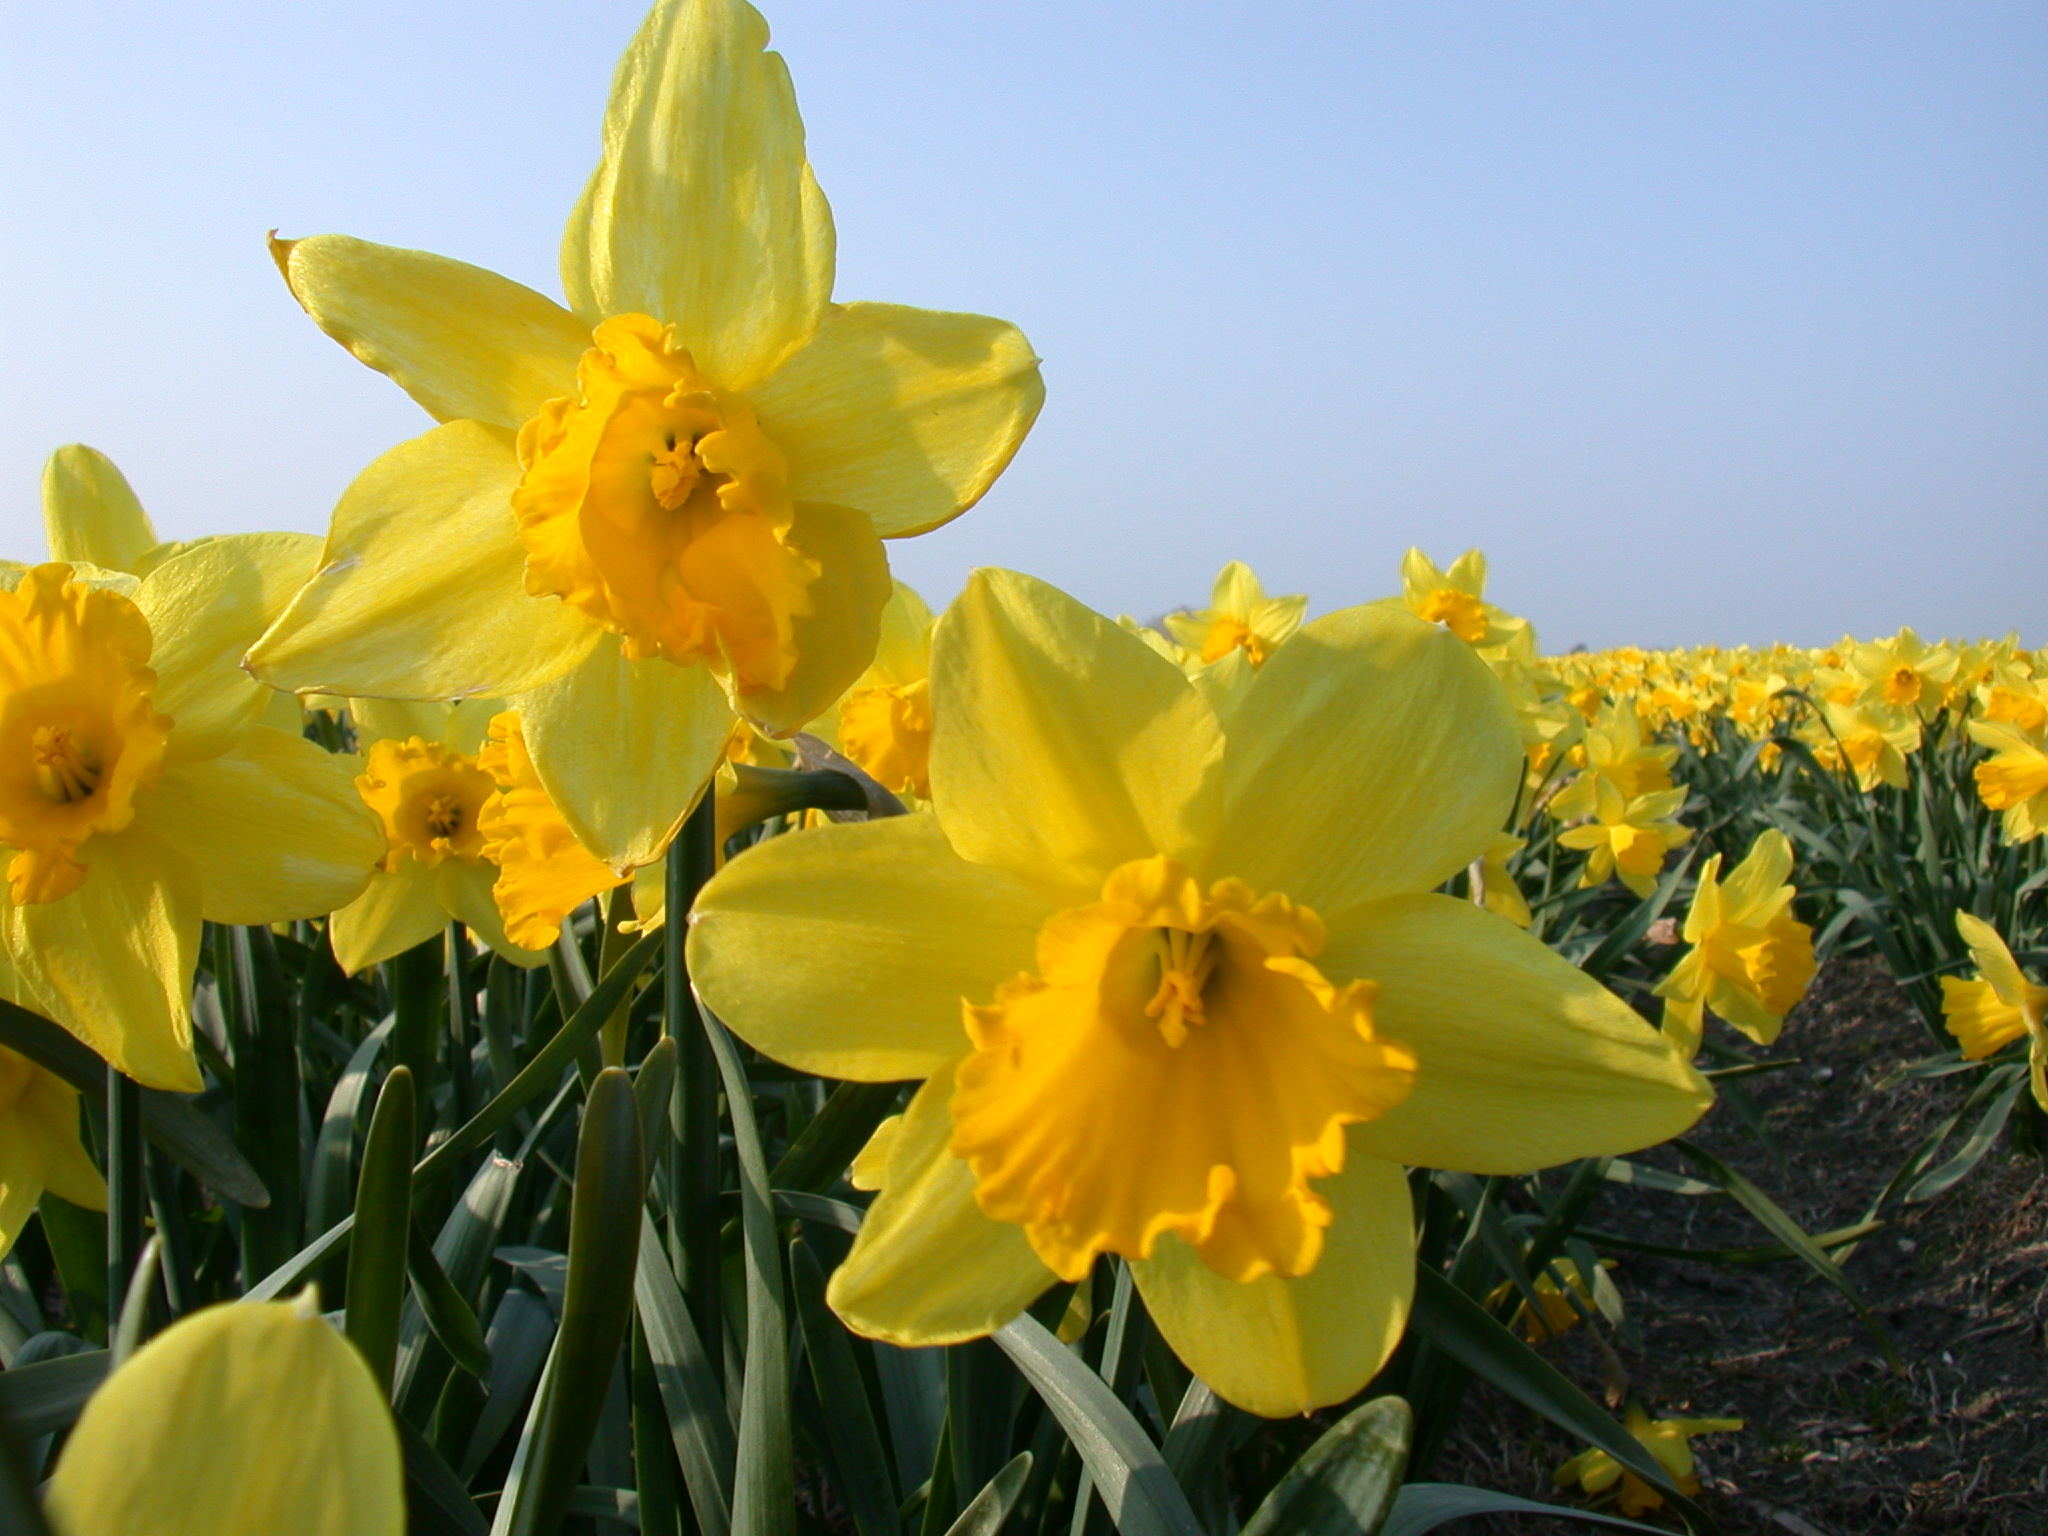 daffodil daffodils yellow nature plants flower flowerbed spring star